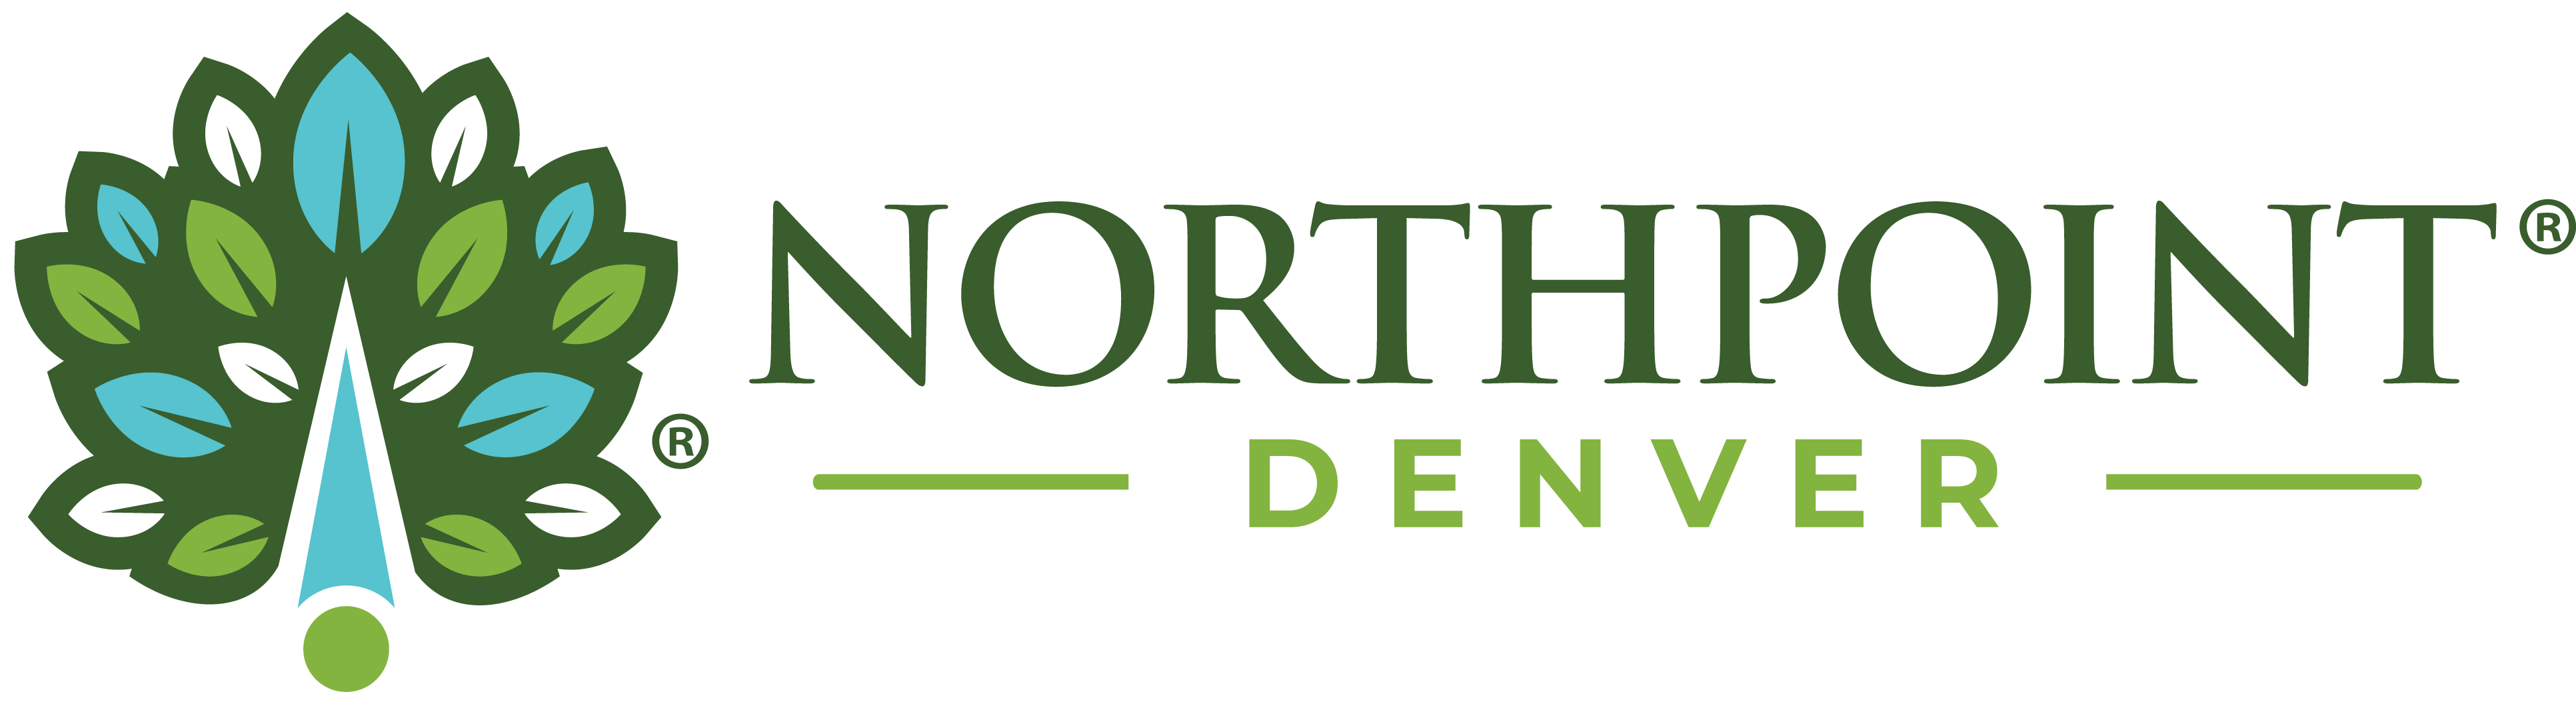 Northpoint Denver